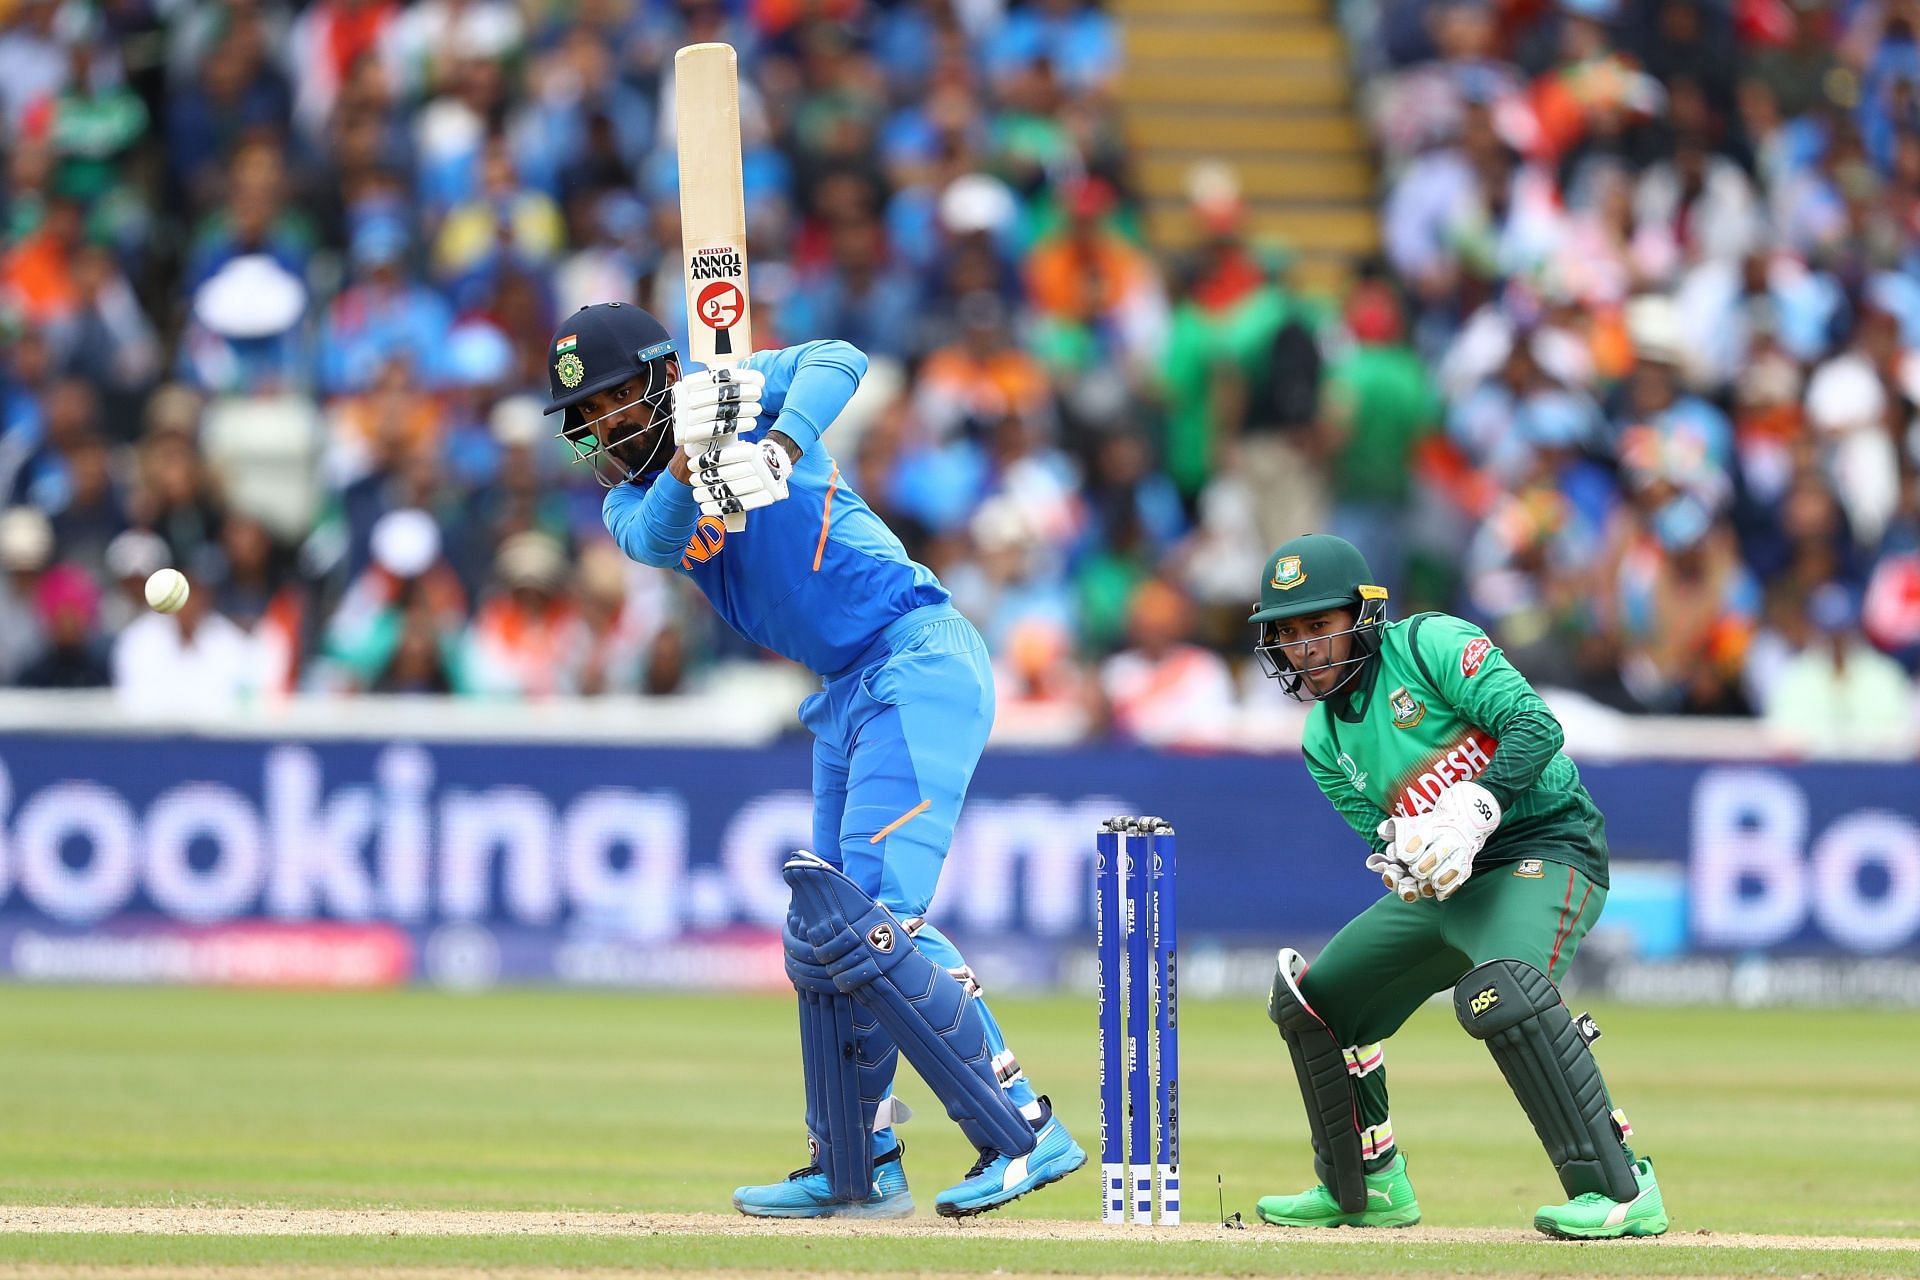 India and Bangladesh could lock horns in the Super Four of the Asia Cup 2022.